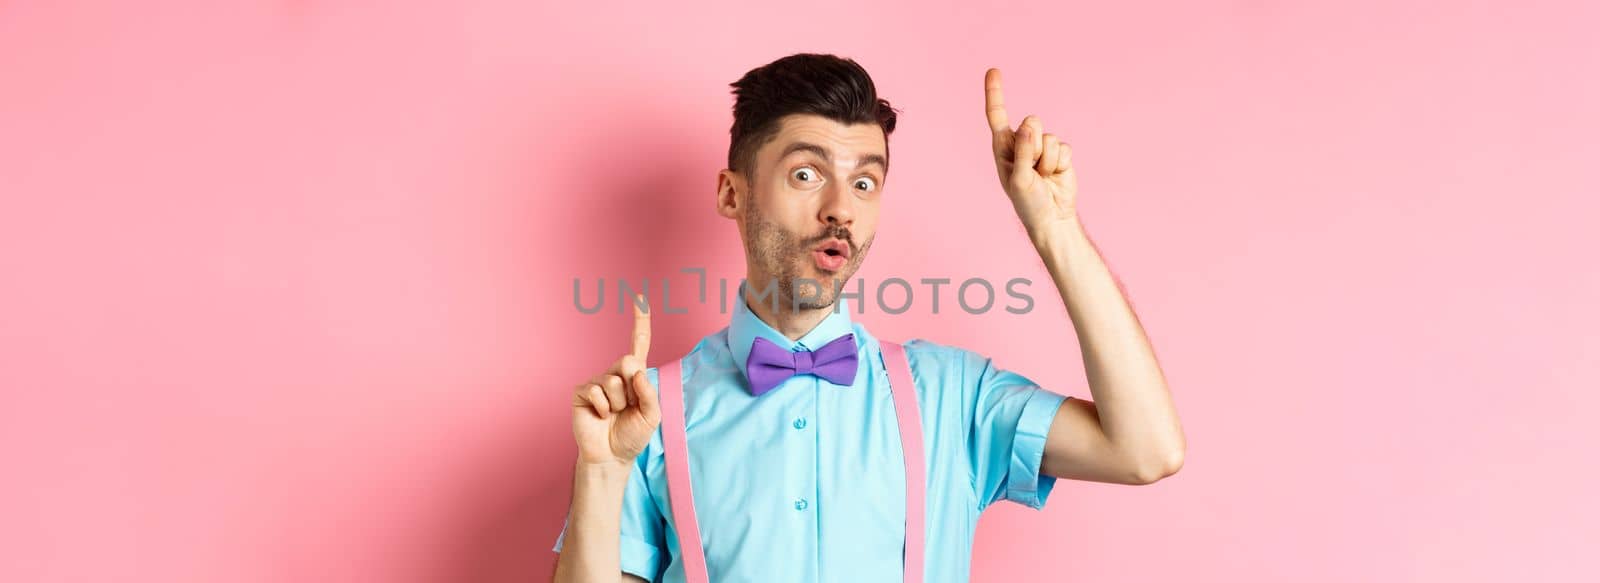 Cheerful funny man dancing in bow-tie and suspenders, pointing fingers up and looking upbeat, standing over pink background.